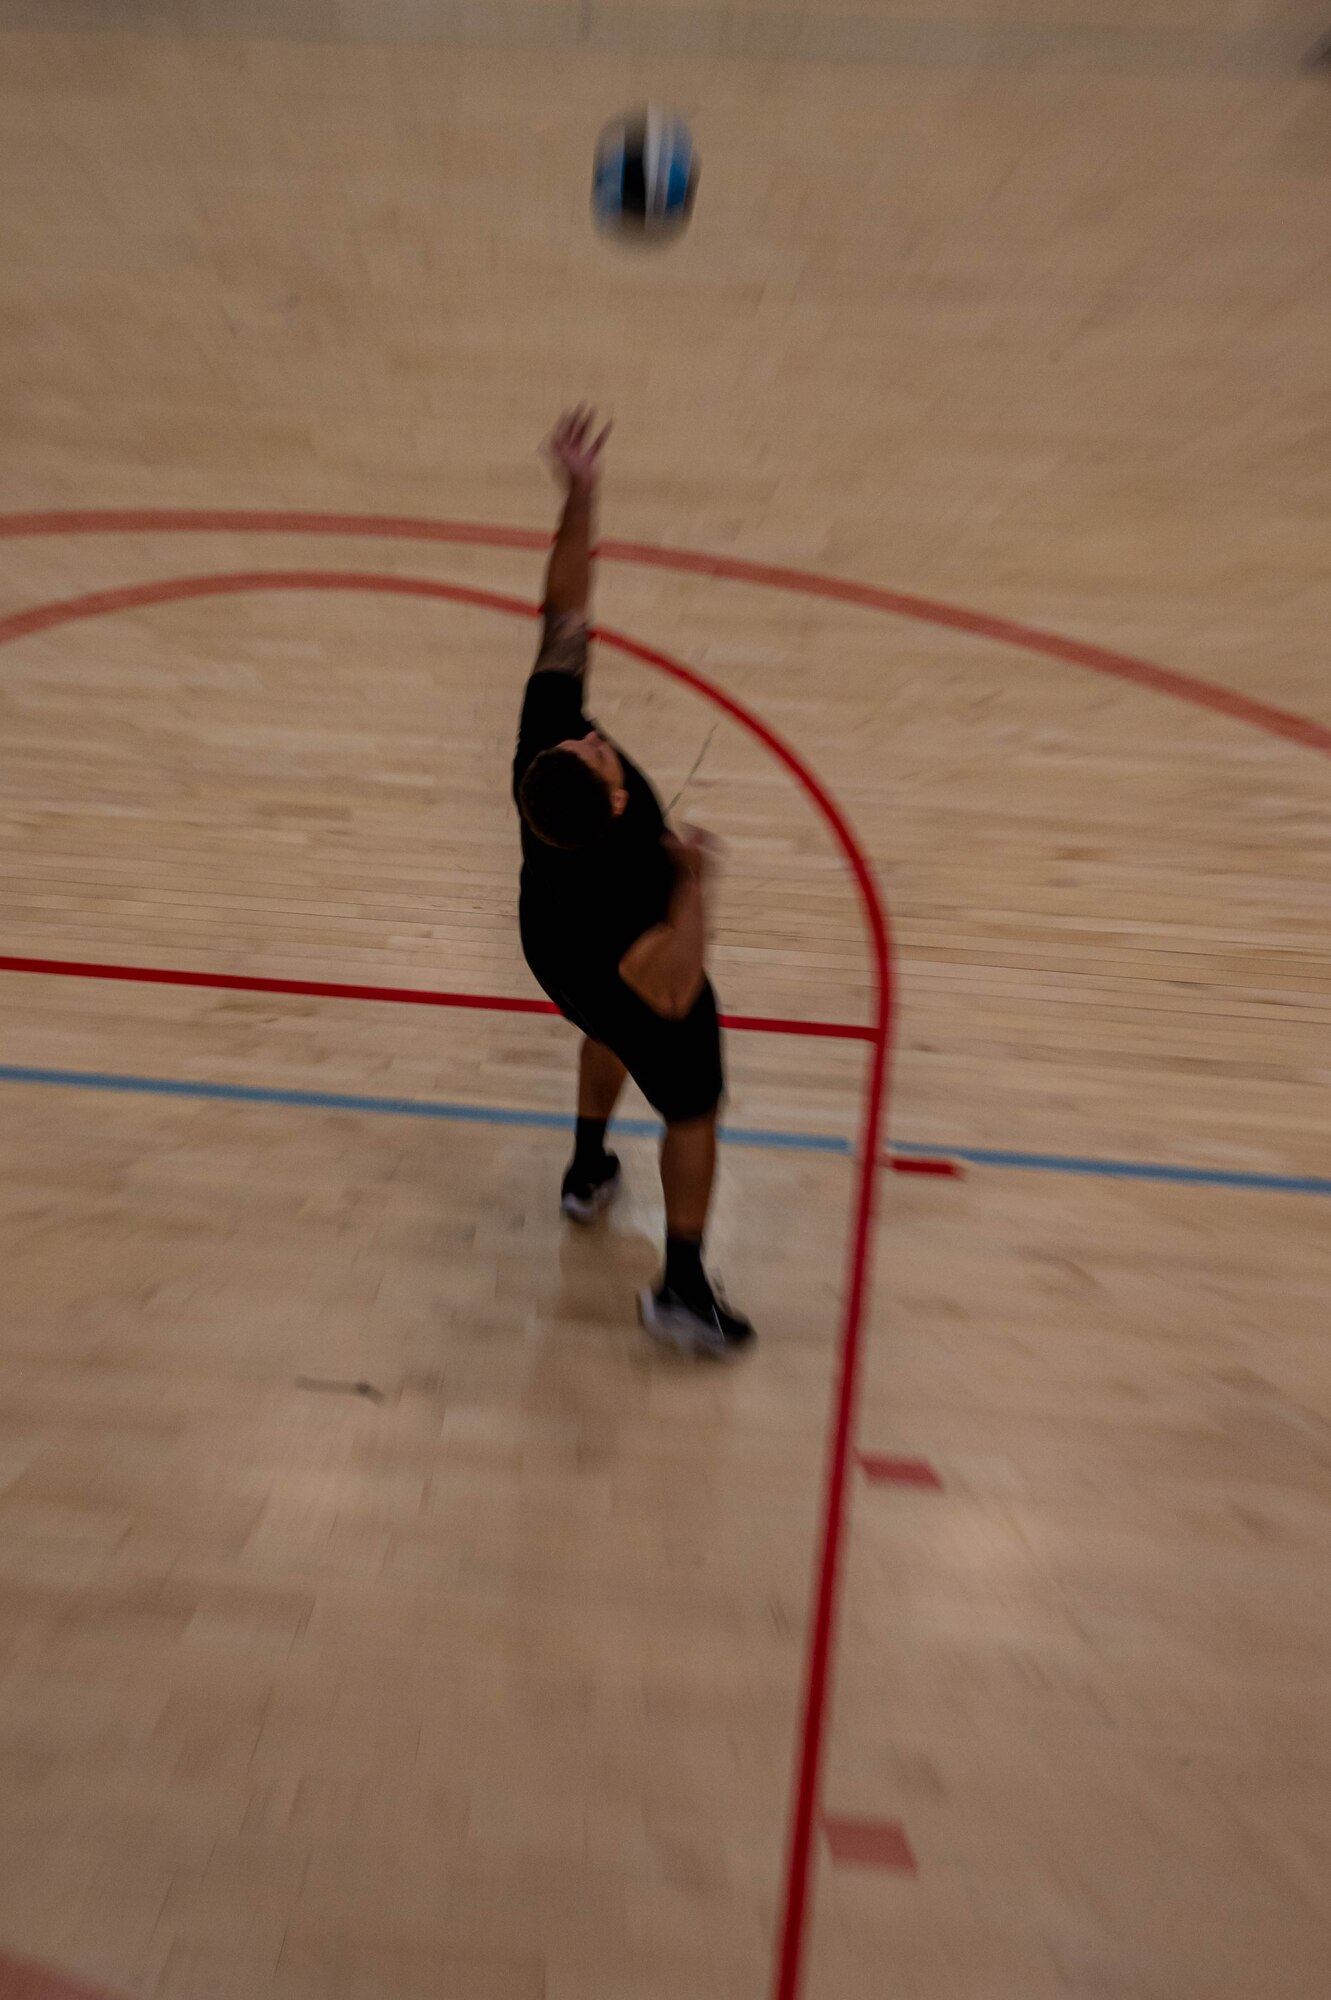 A Team Minot Airman prepares to serve volleyball during the Summer Games at Minot Air Force Base, North Dakota, Aug. 25, 2023. The  Summer Games have been taking place since 2015, promoting physical health, camaraderie and competition. (U.S. Air Force photo by Airman 1st Class Alexander Nottingham)